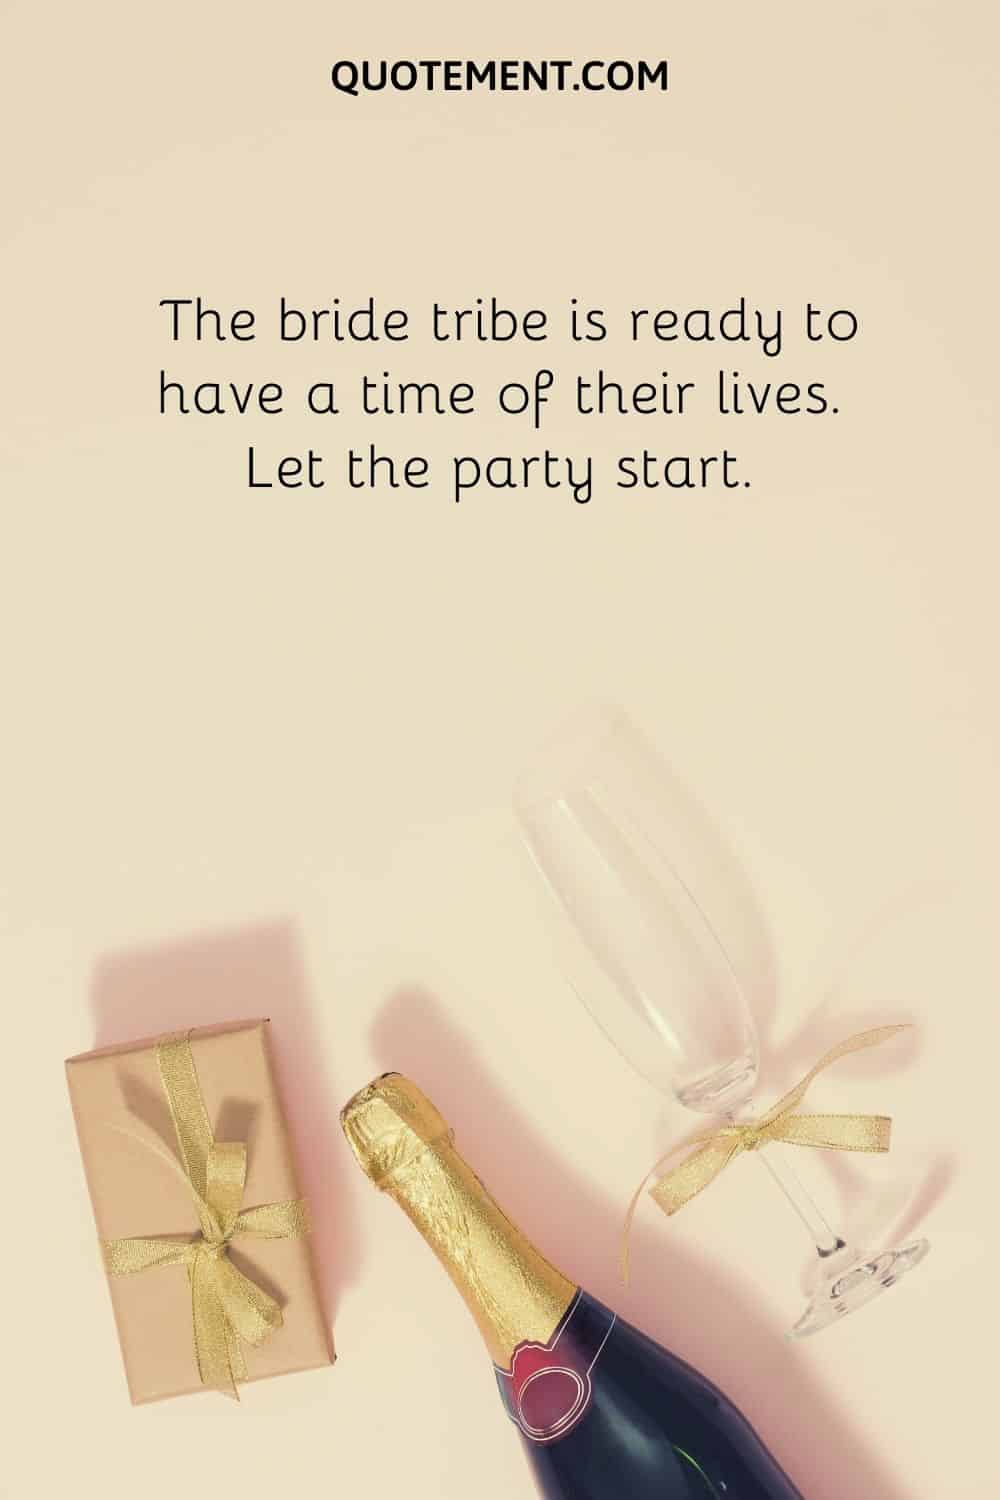 The bride tribe is ready to have a time of their lives